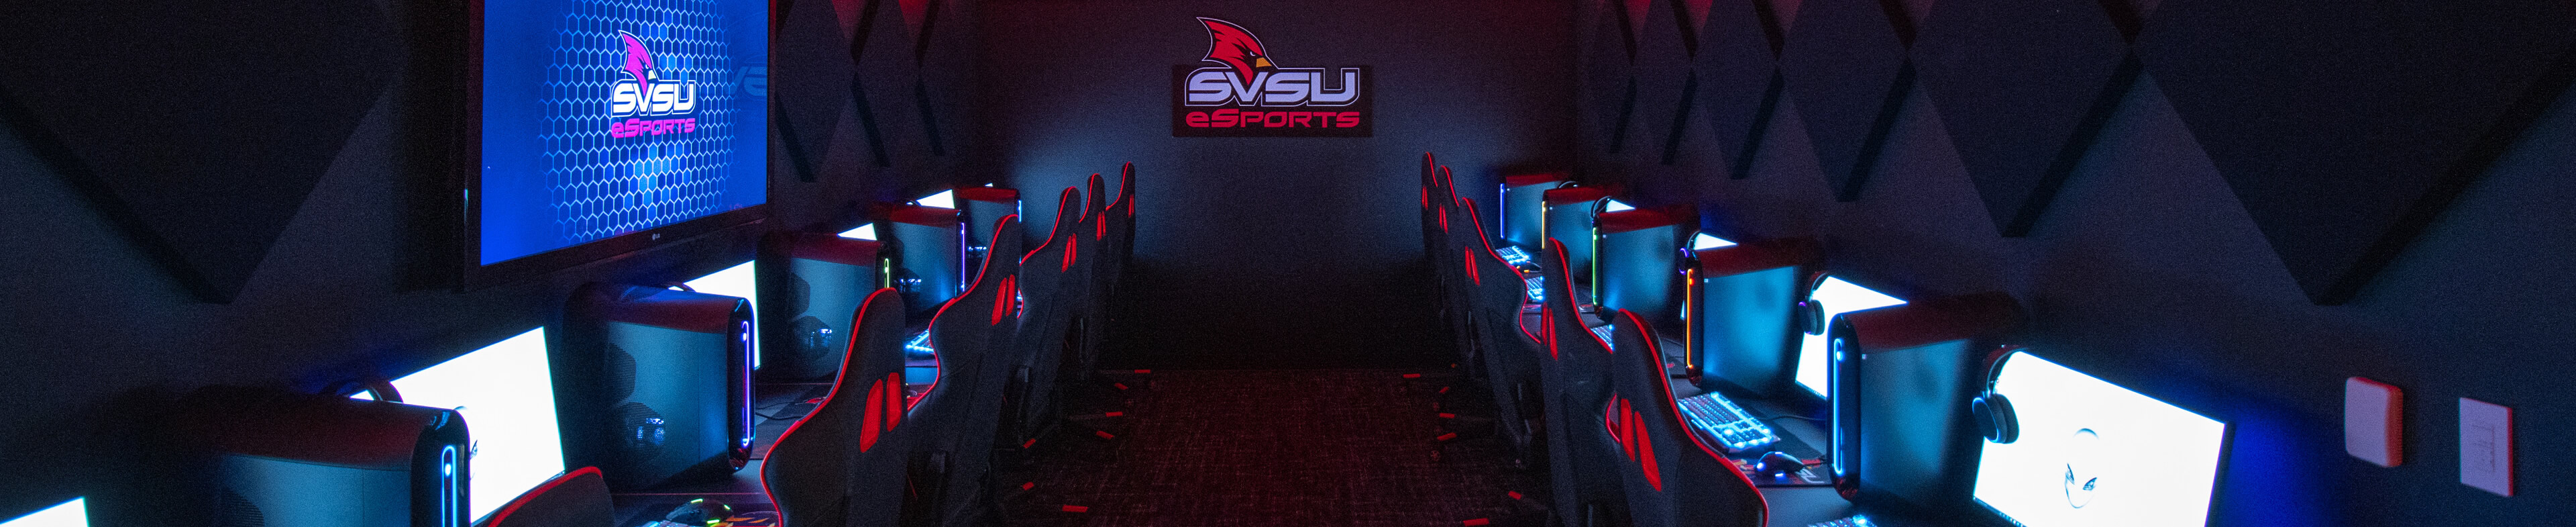 eSports room with computers lined up and large screen